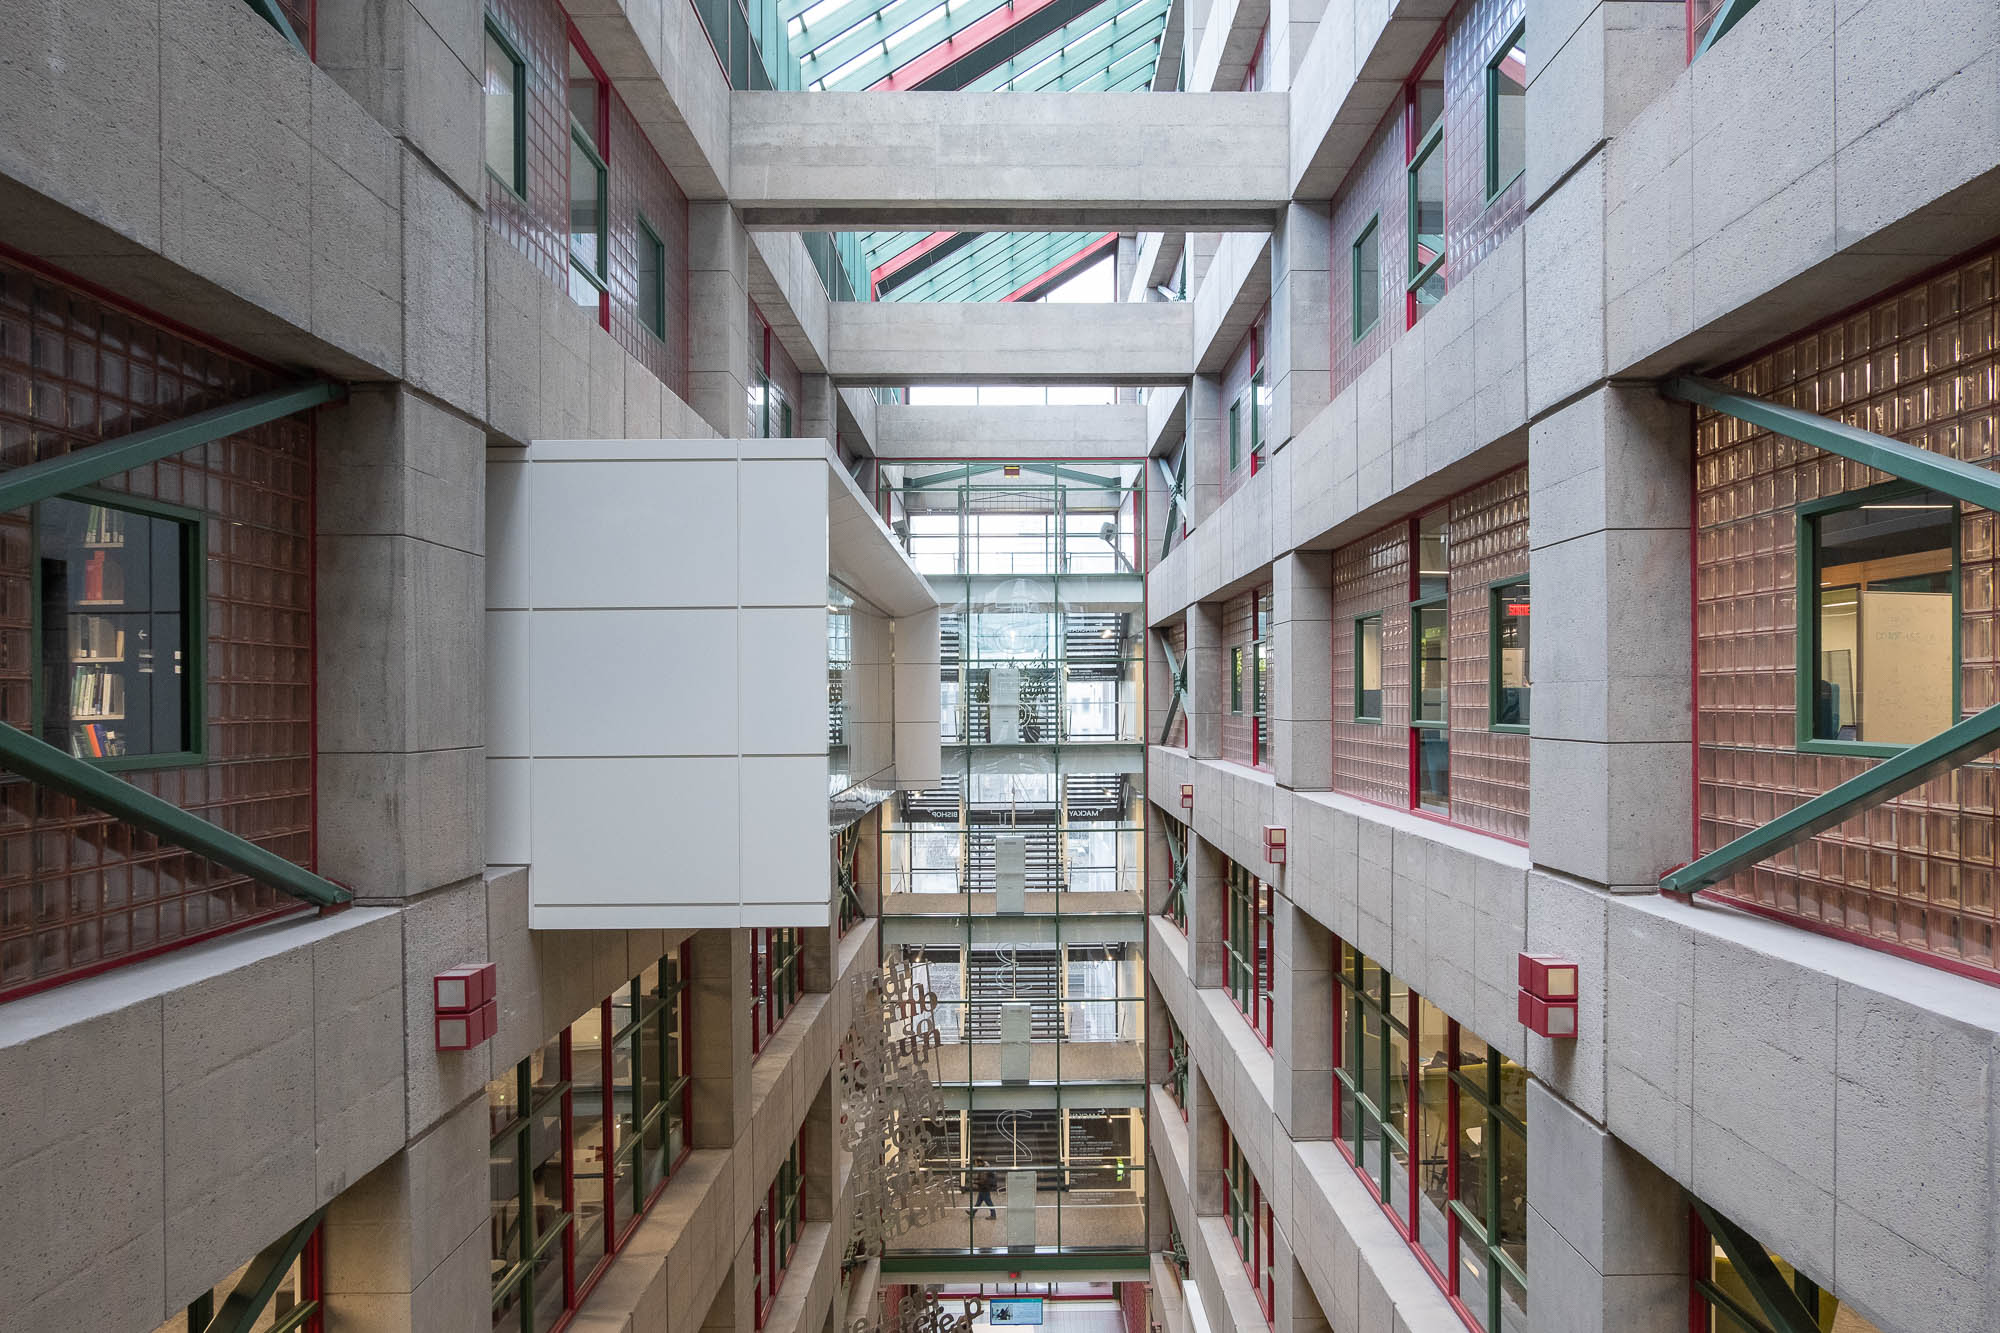 Webster Library, Concordia University in Montreal